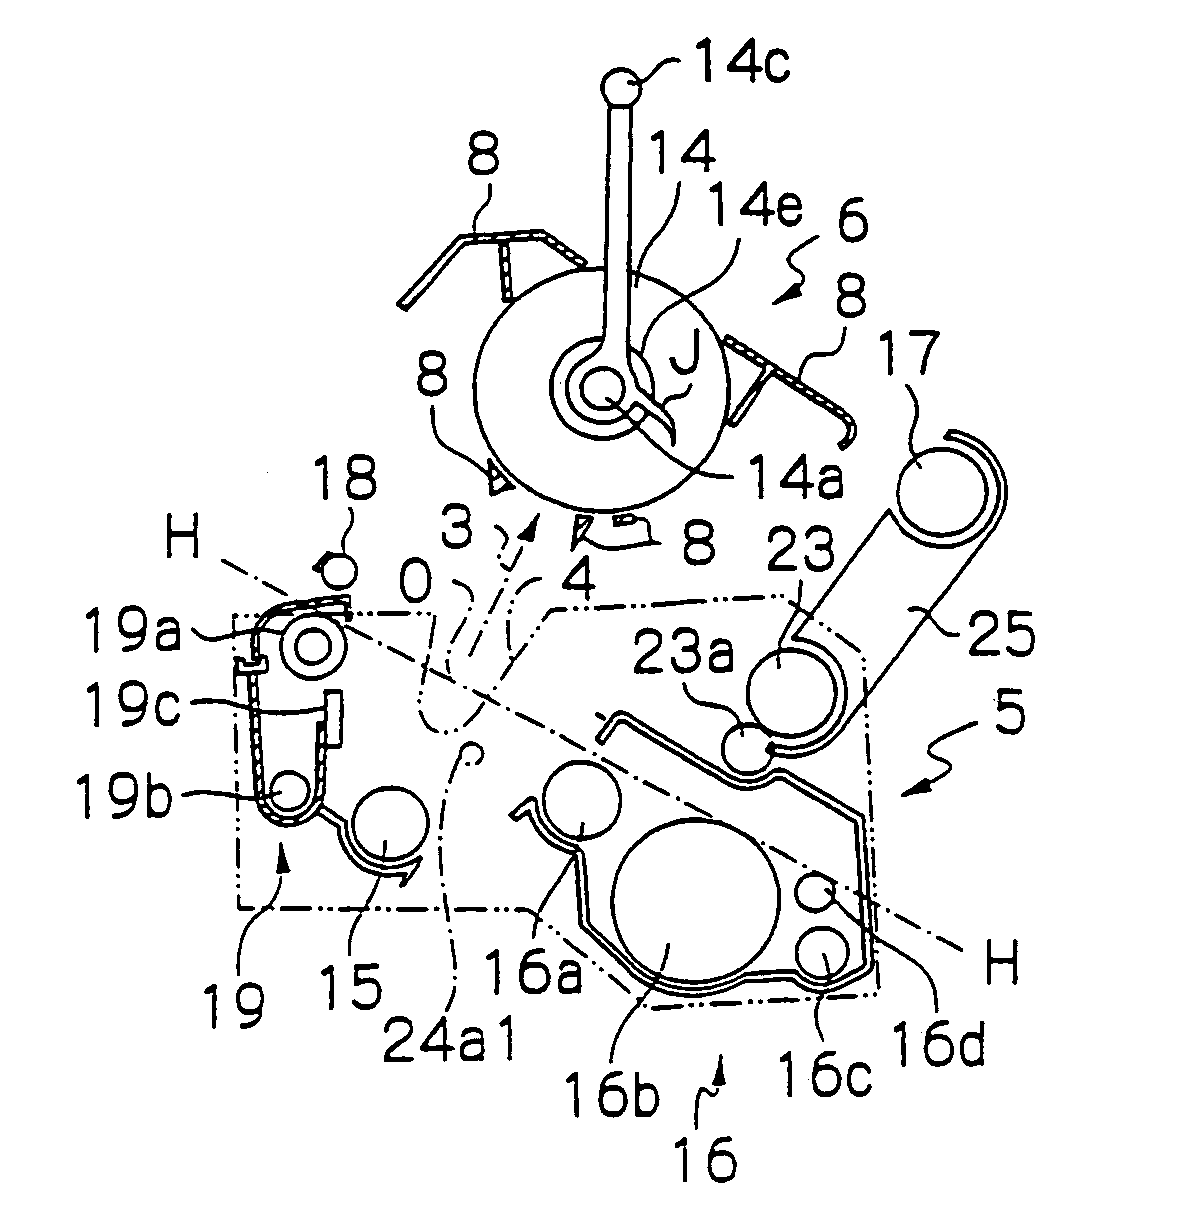 Image forming apparatus with components removable in preselected direction and order